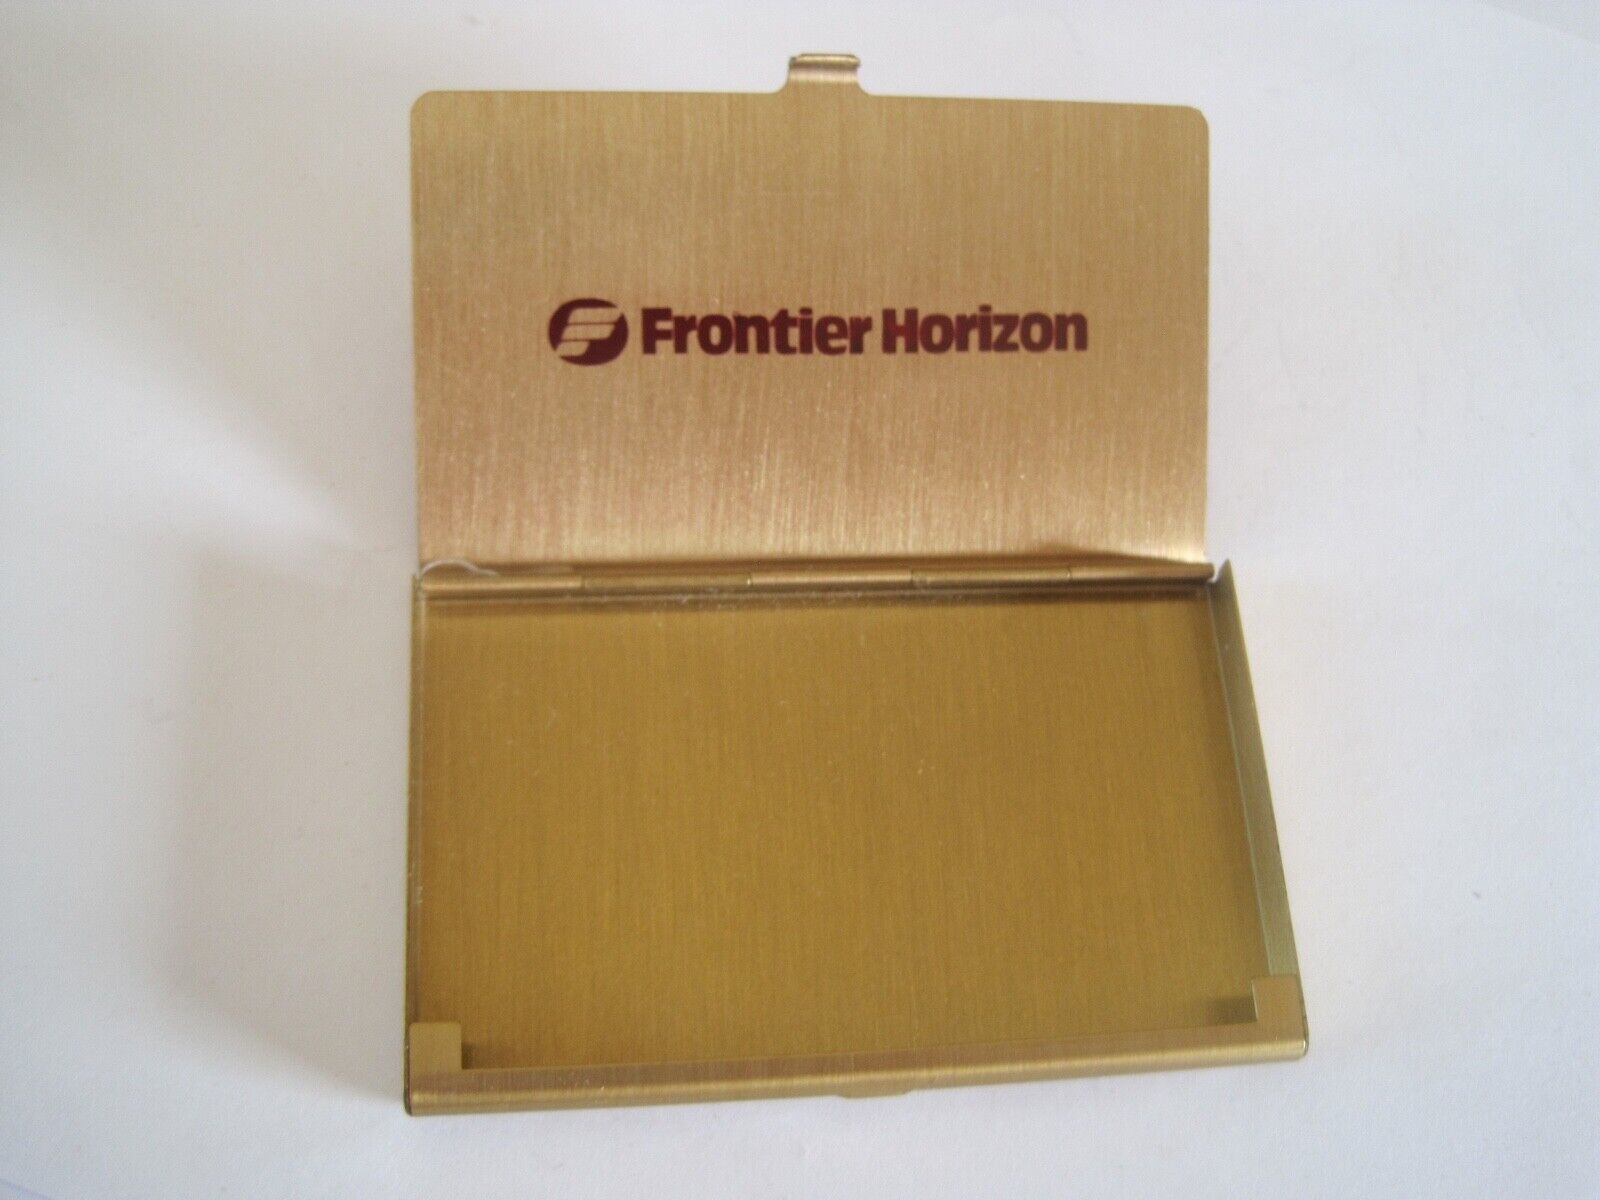 Frontier Airlines Business Card Holder Frontier Horizon 